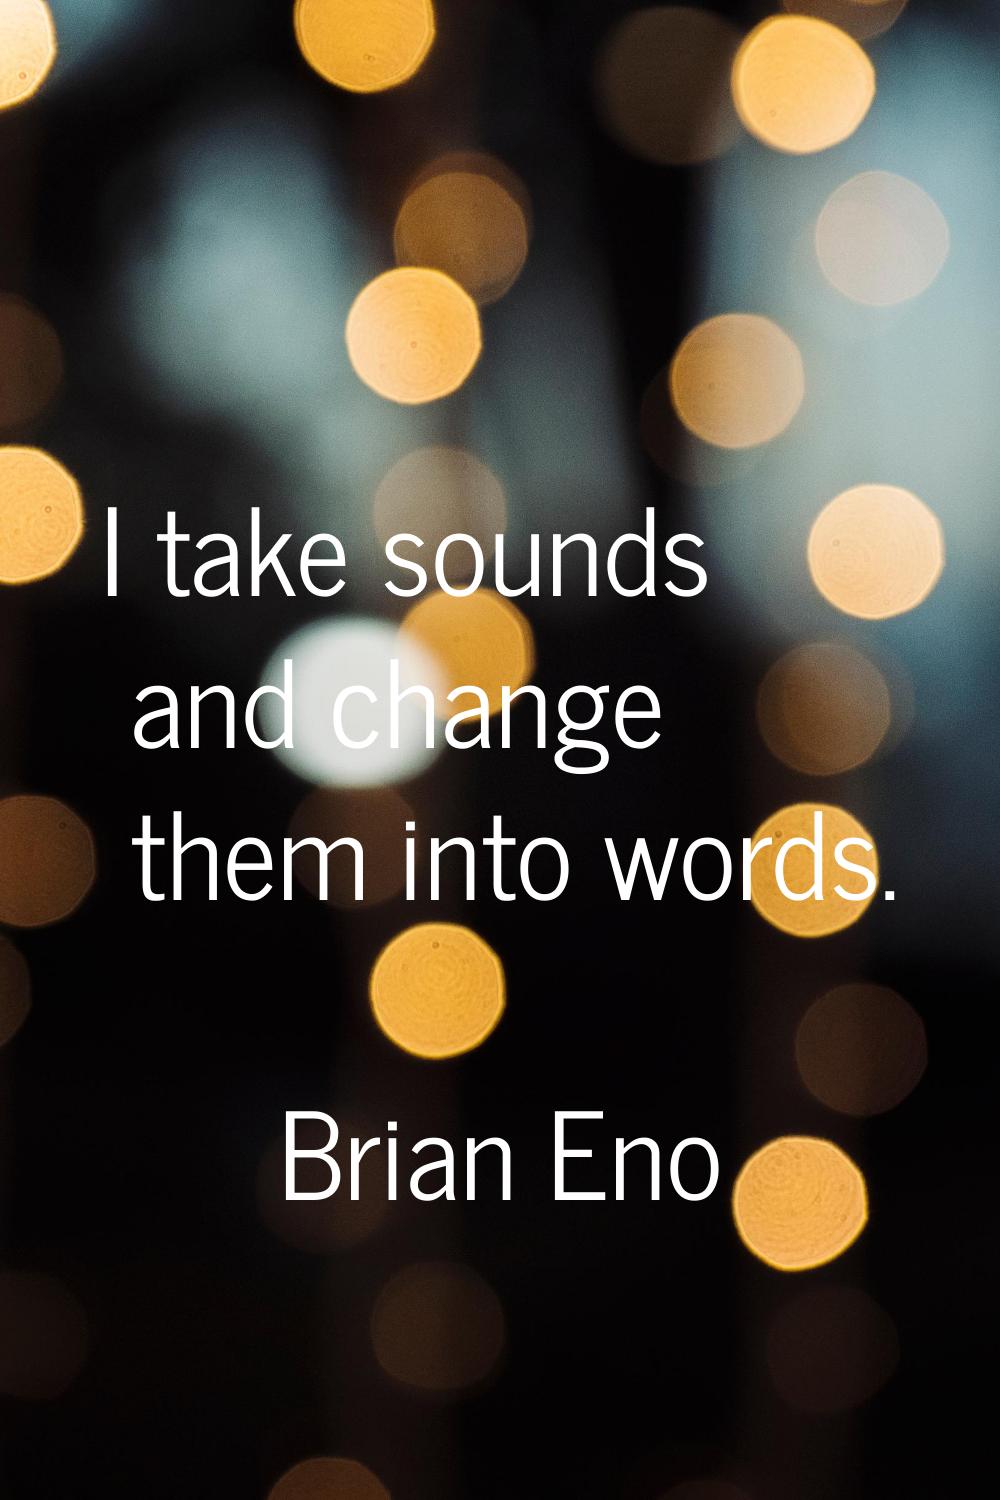 I take sounds and change them into words.